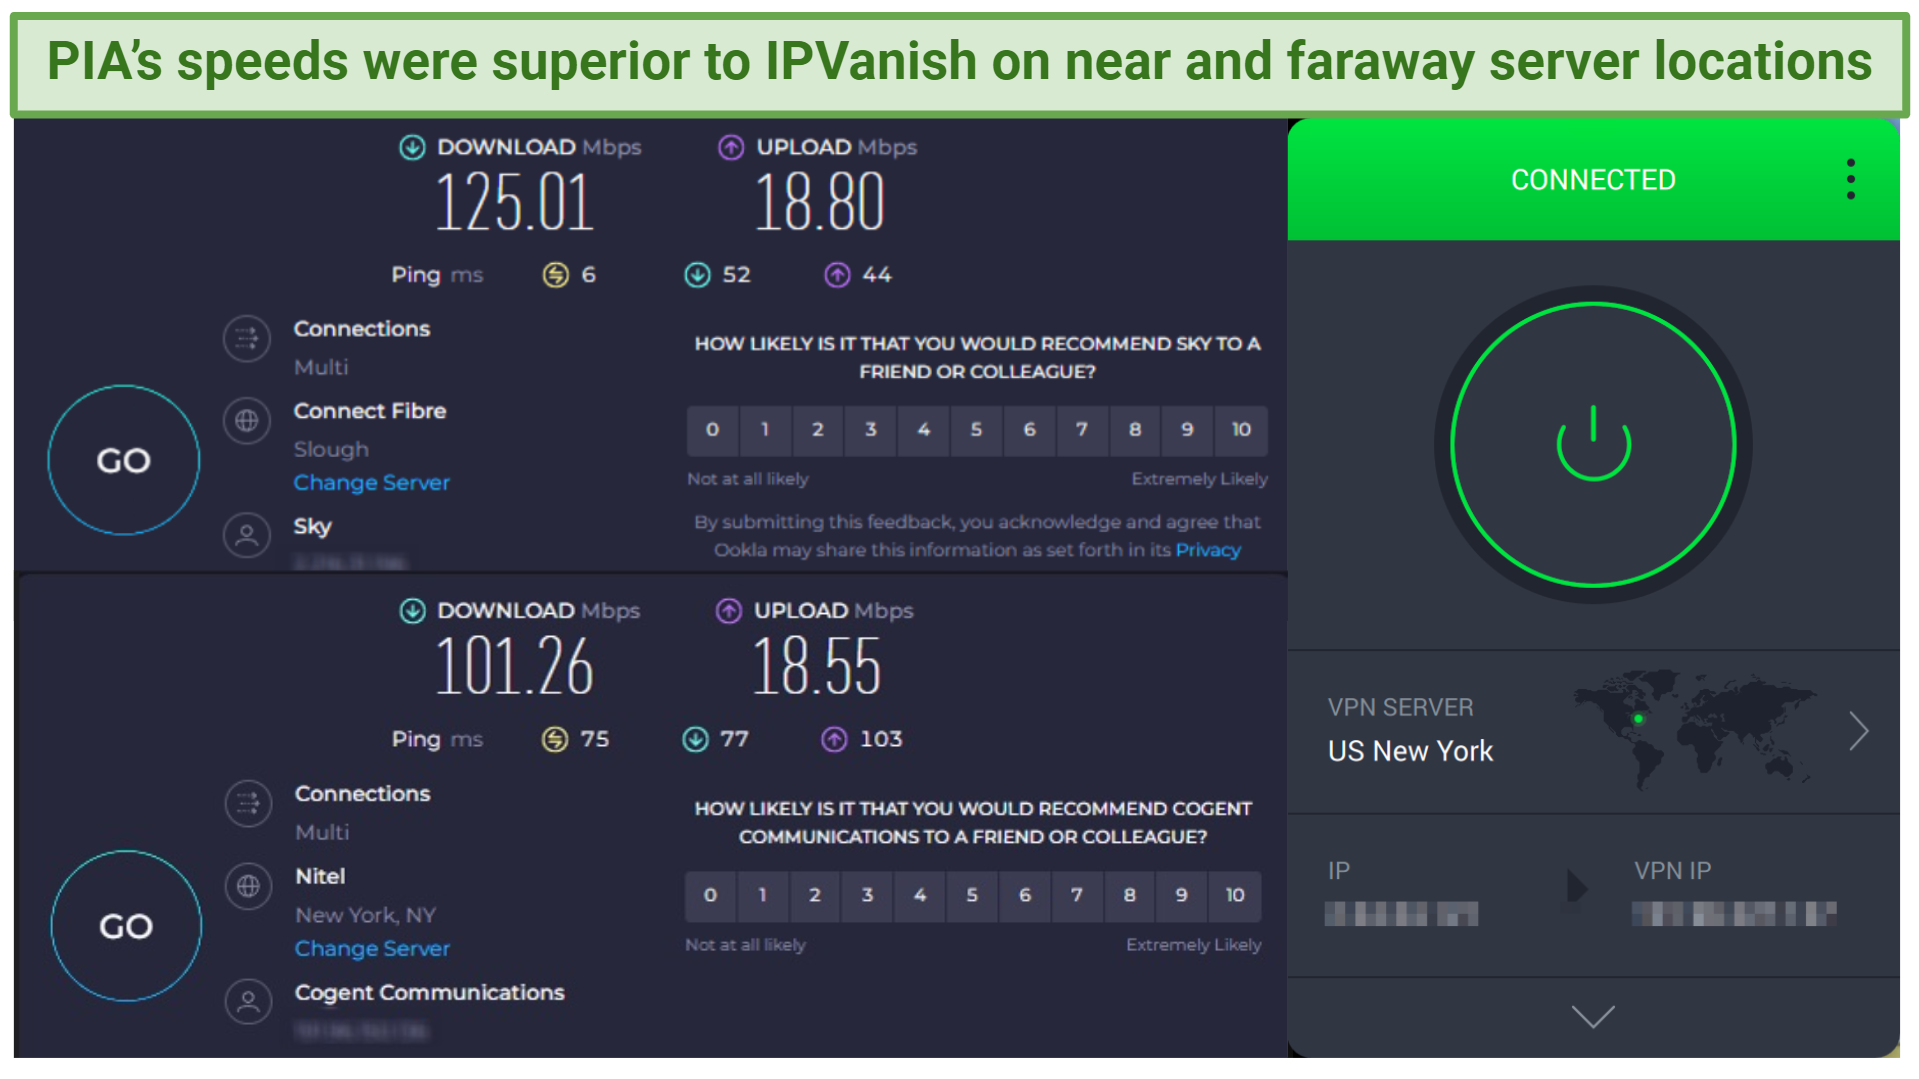 Screenshot showing a speed test with the PIA app connected to a server in New York